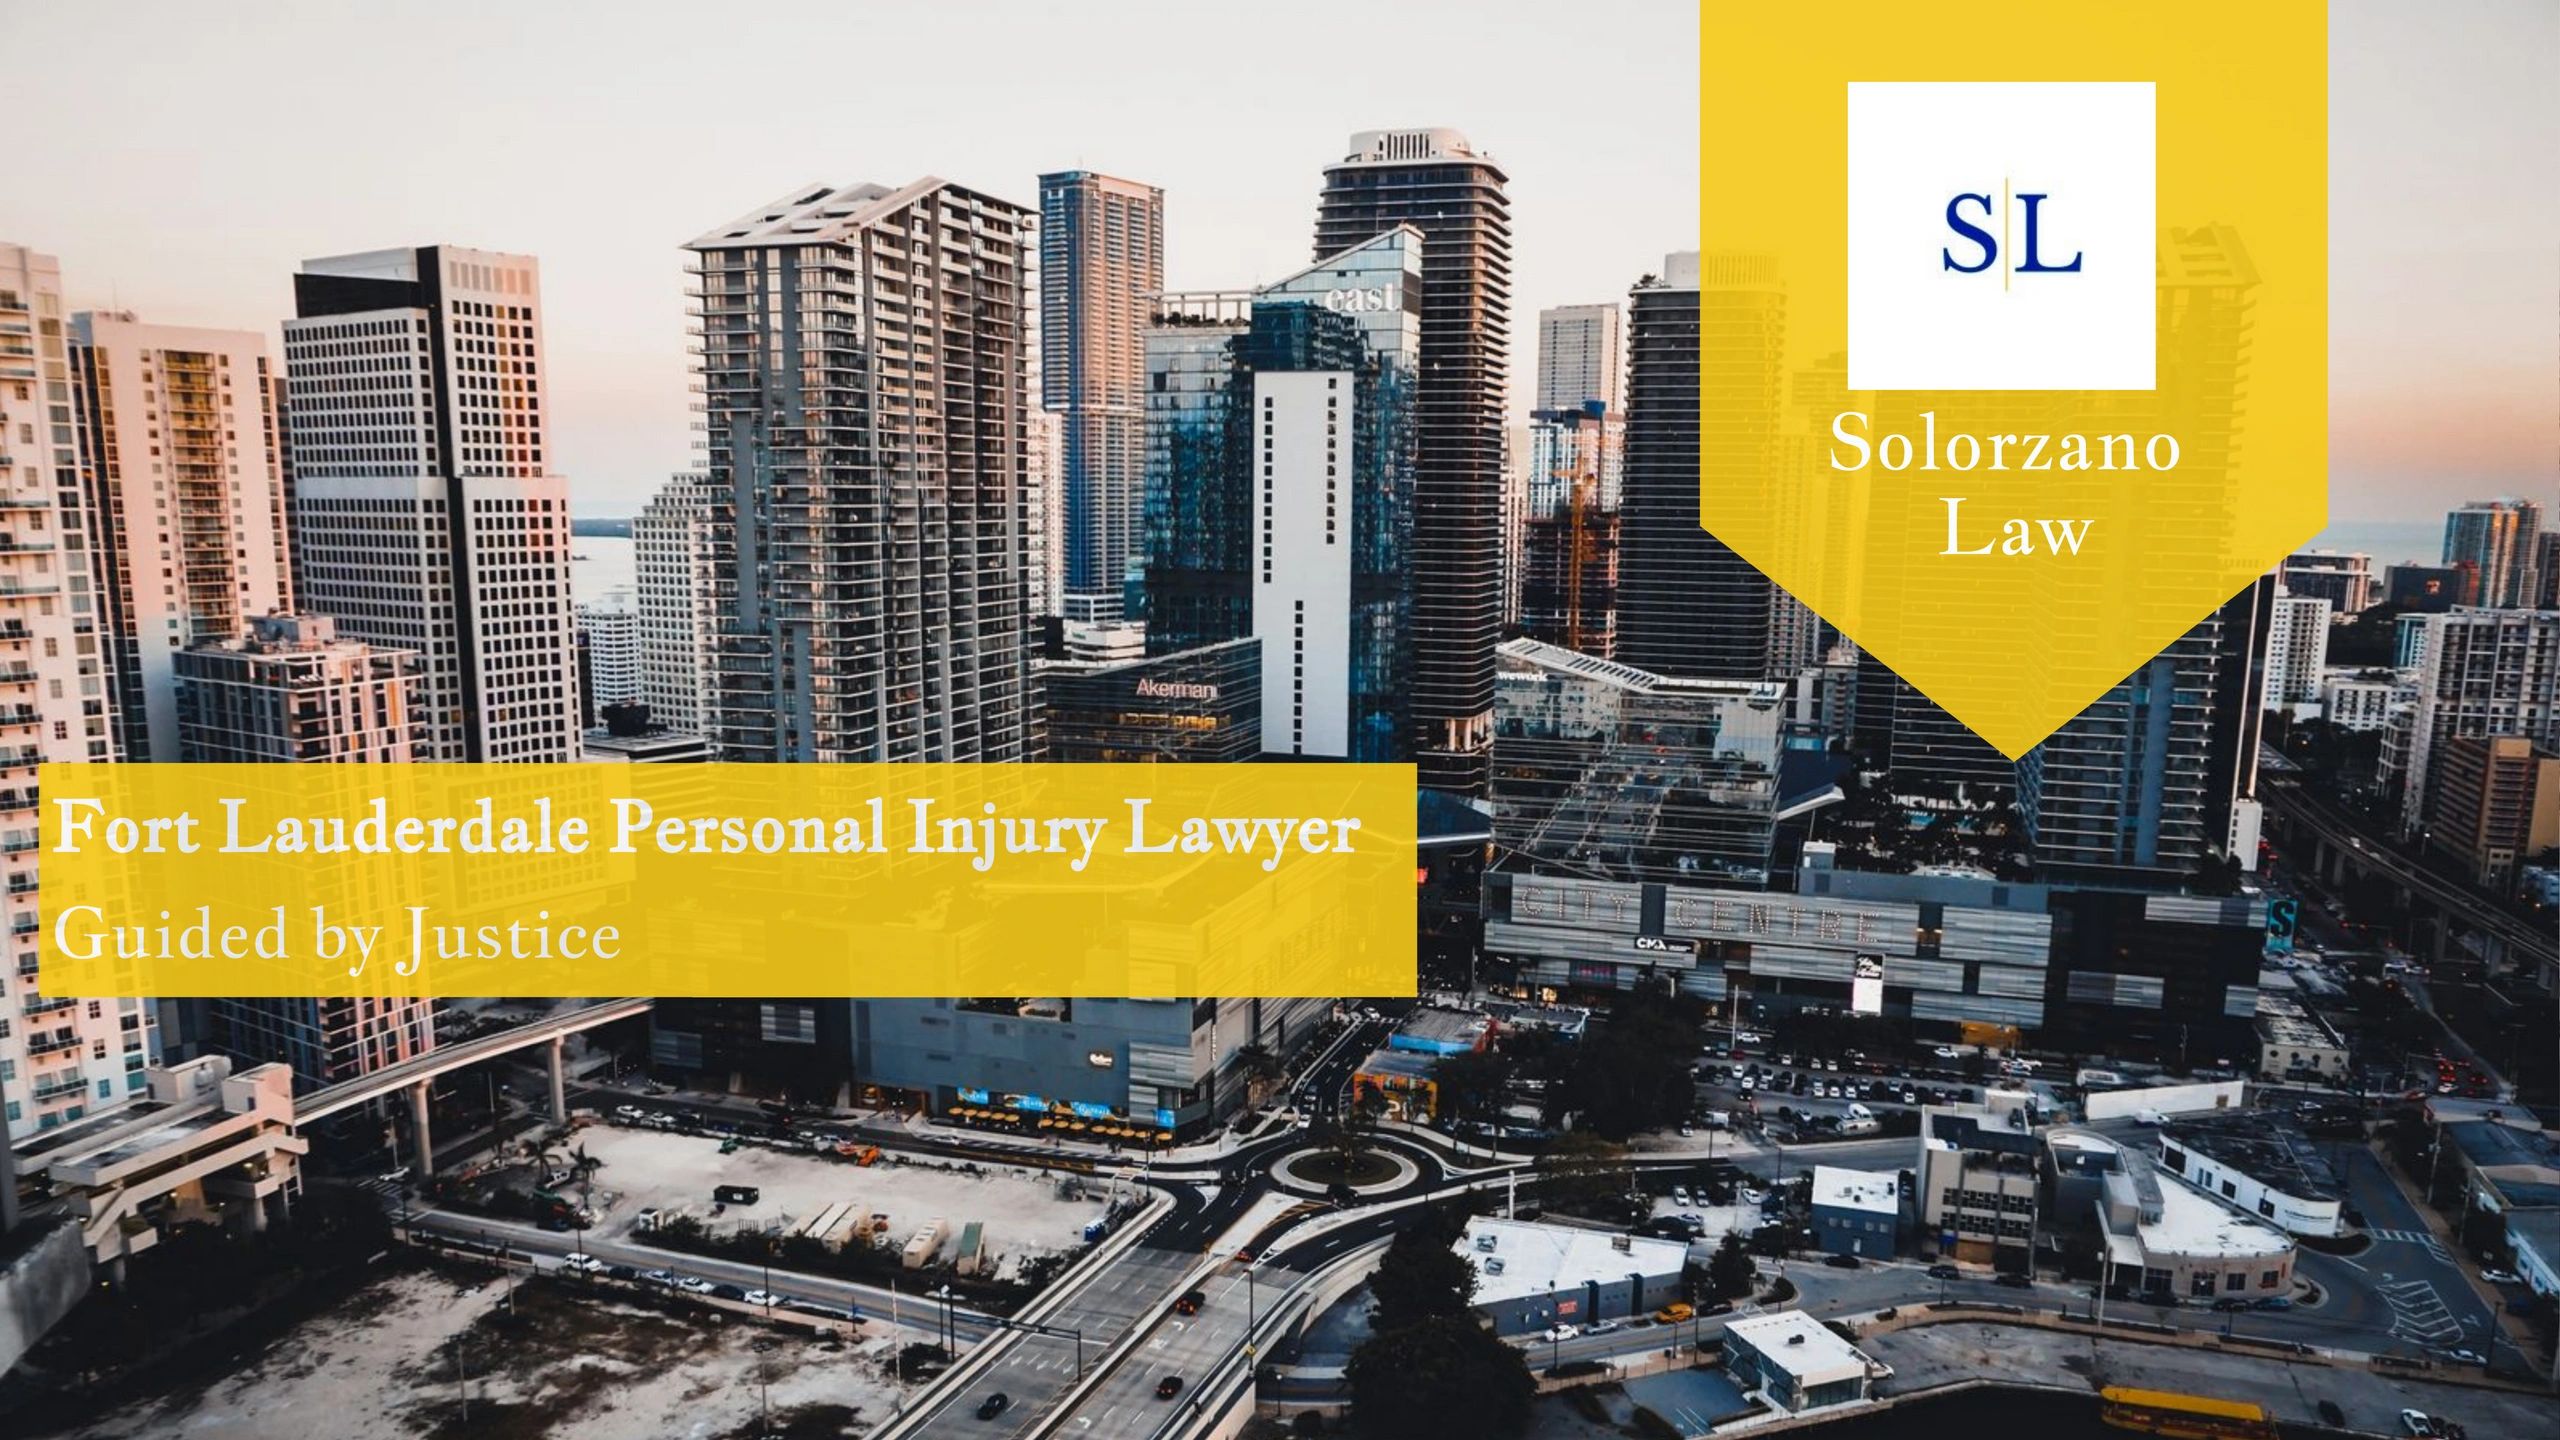 best car accident lawyer in fort lauderdale
ft. lauderdale car accident attorney
fort lauderdale law